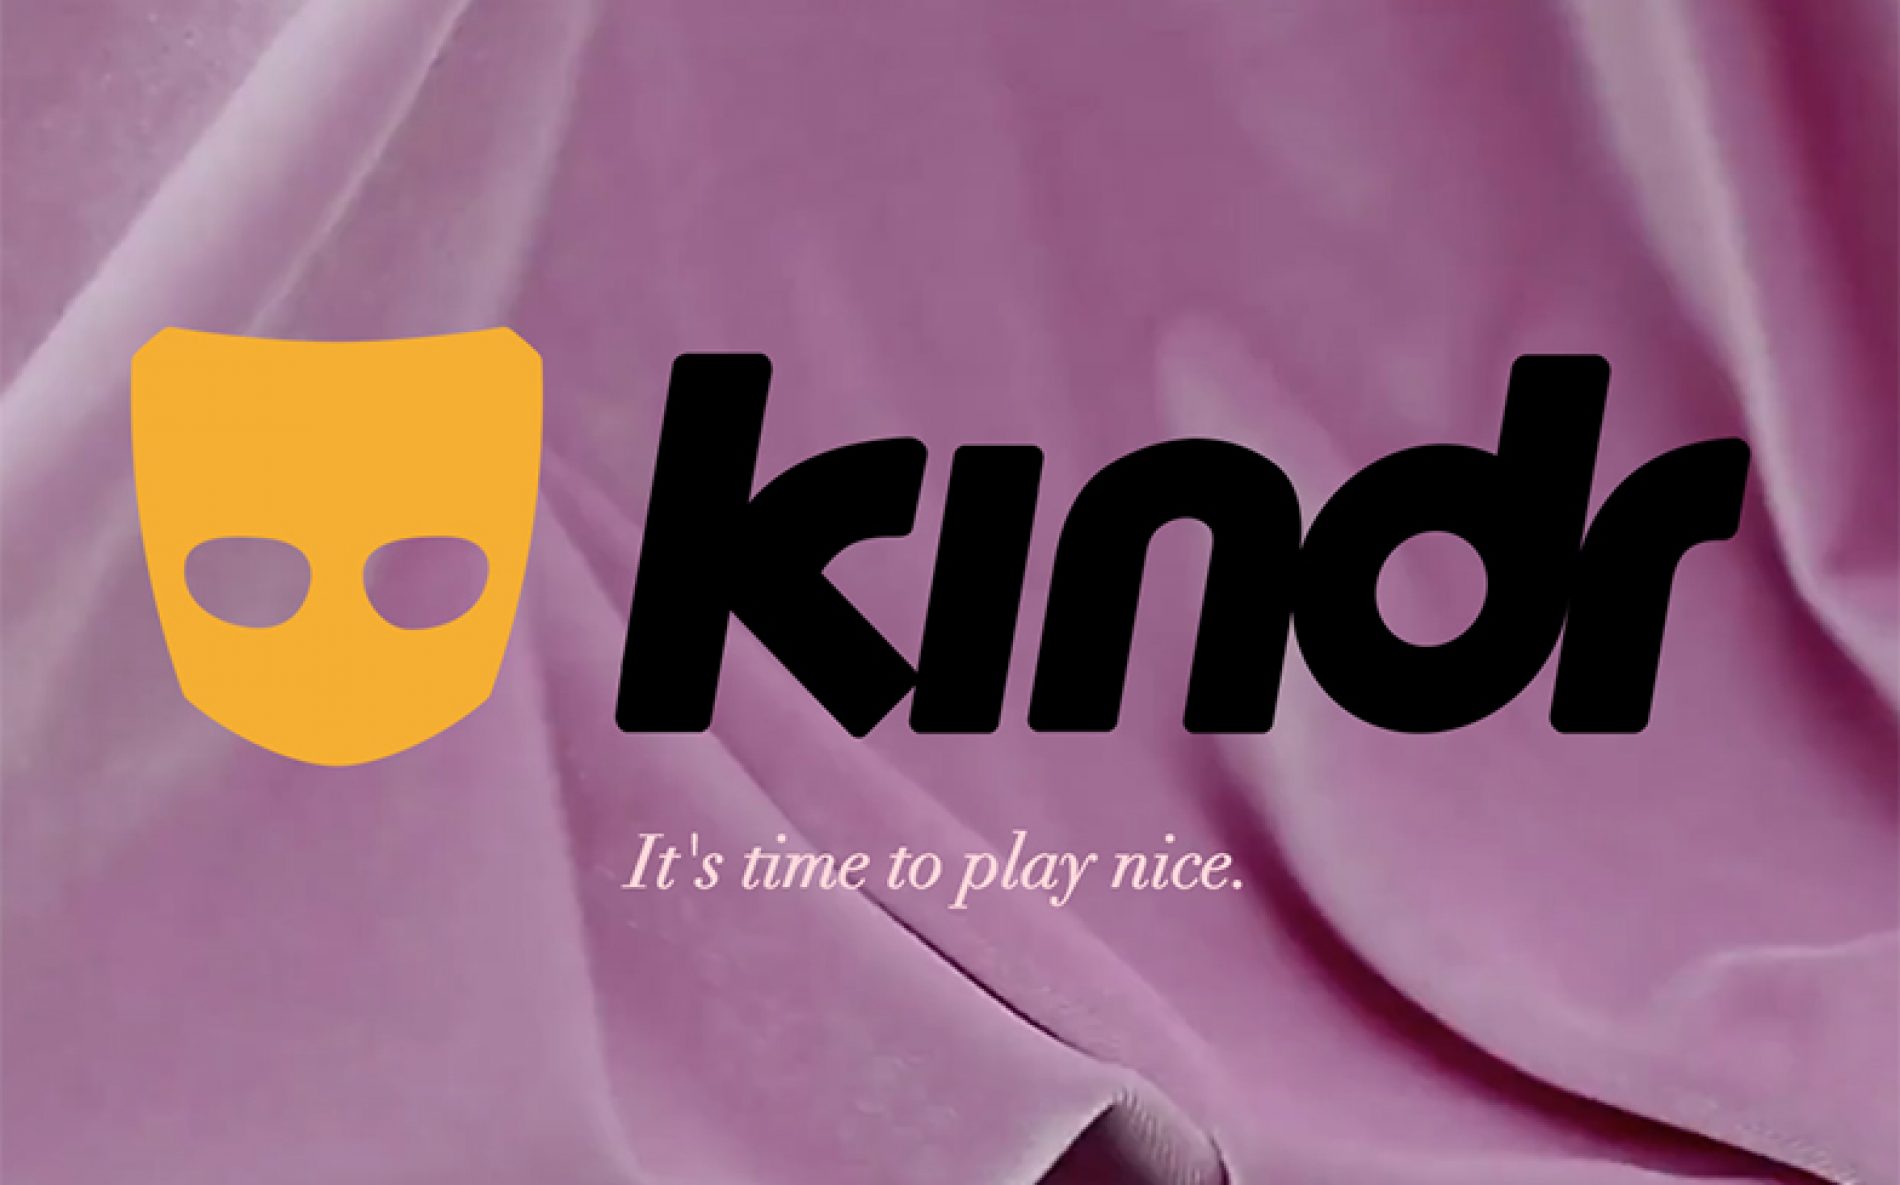 Grindr launches Kindr initiative, to stop profiles from stating ‘No fats, no fems, no Asians’